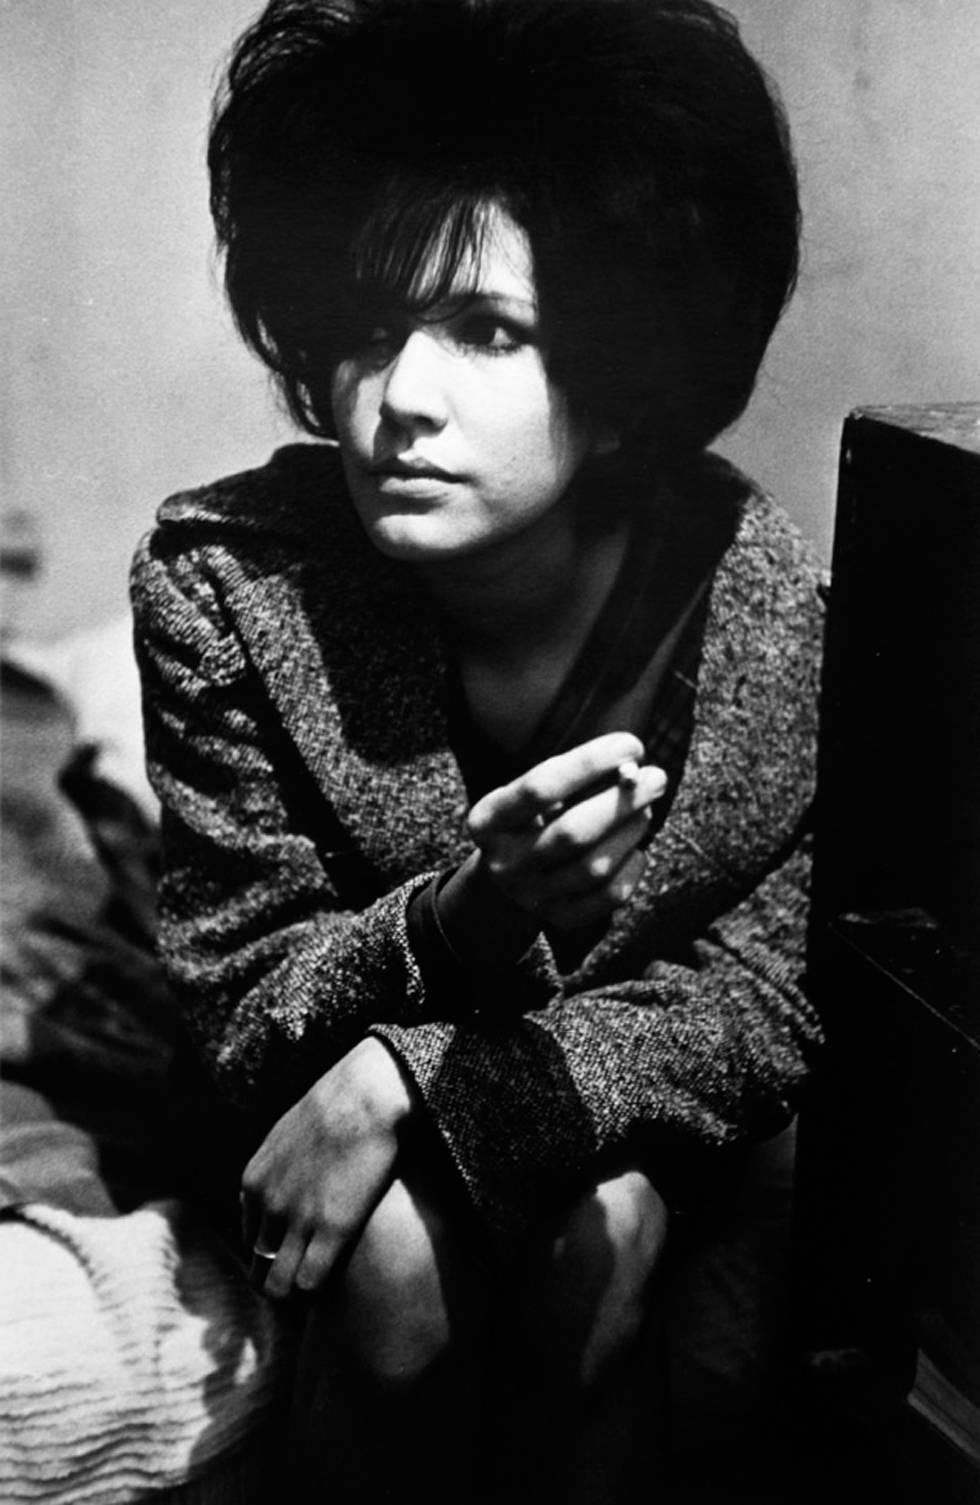 Larry Clark Black and White Photograph - Untitled (Girl with Cigarette)